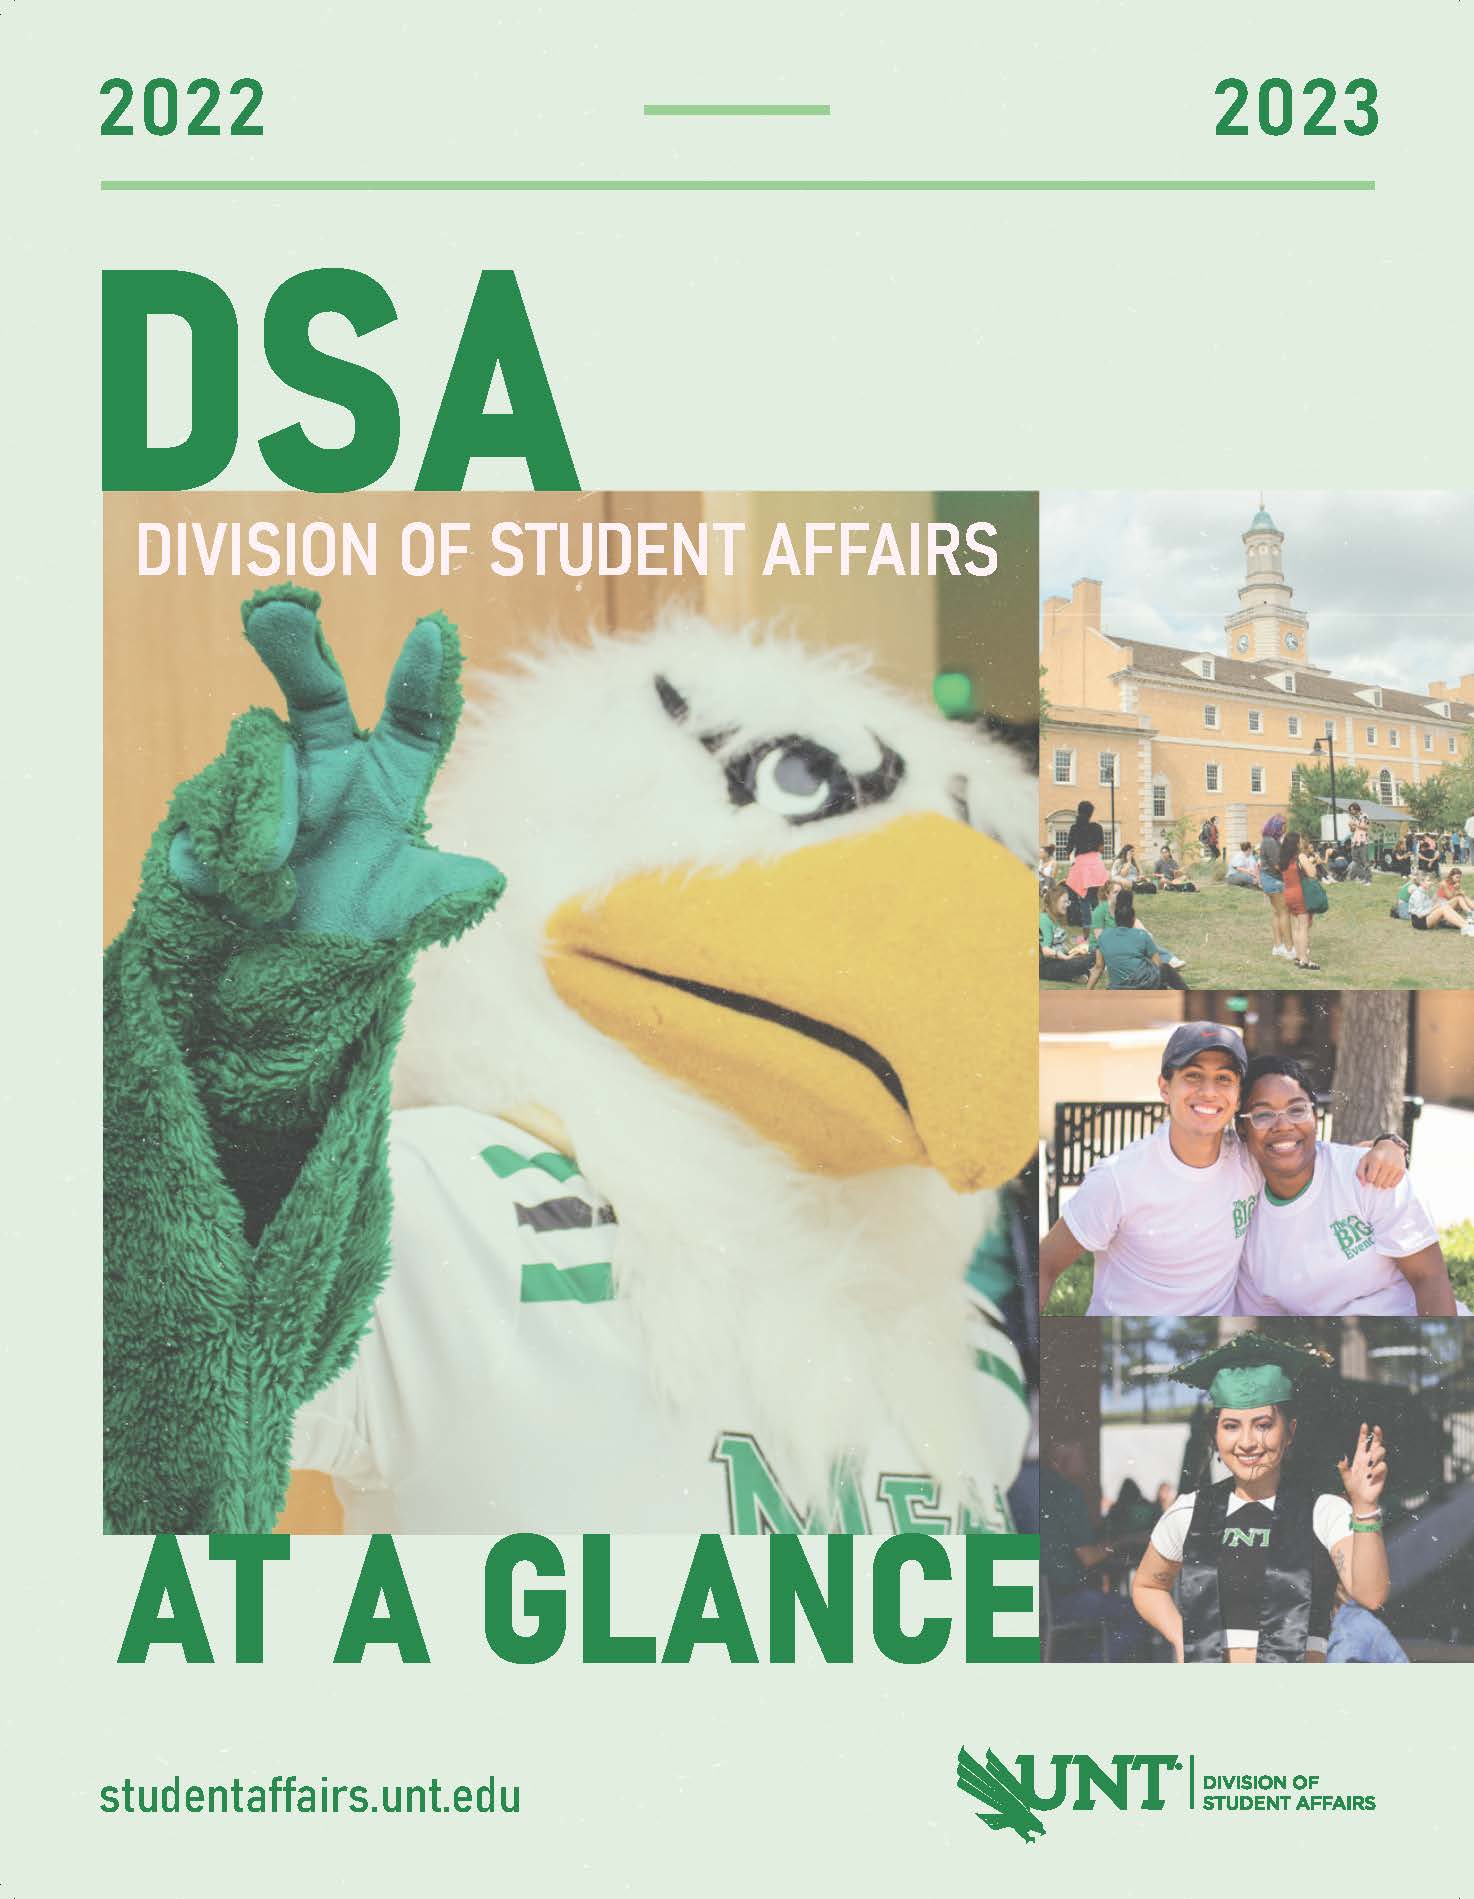 DSA at a glance, scrappy giving the claw and students on campus